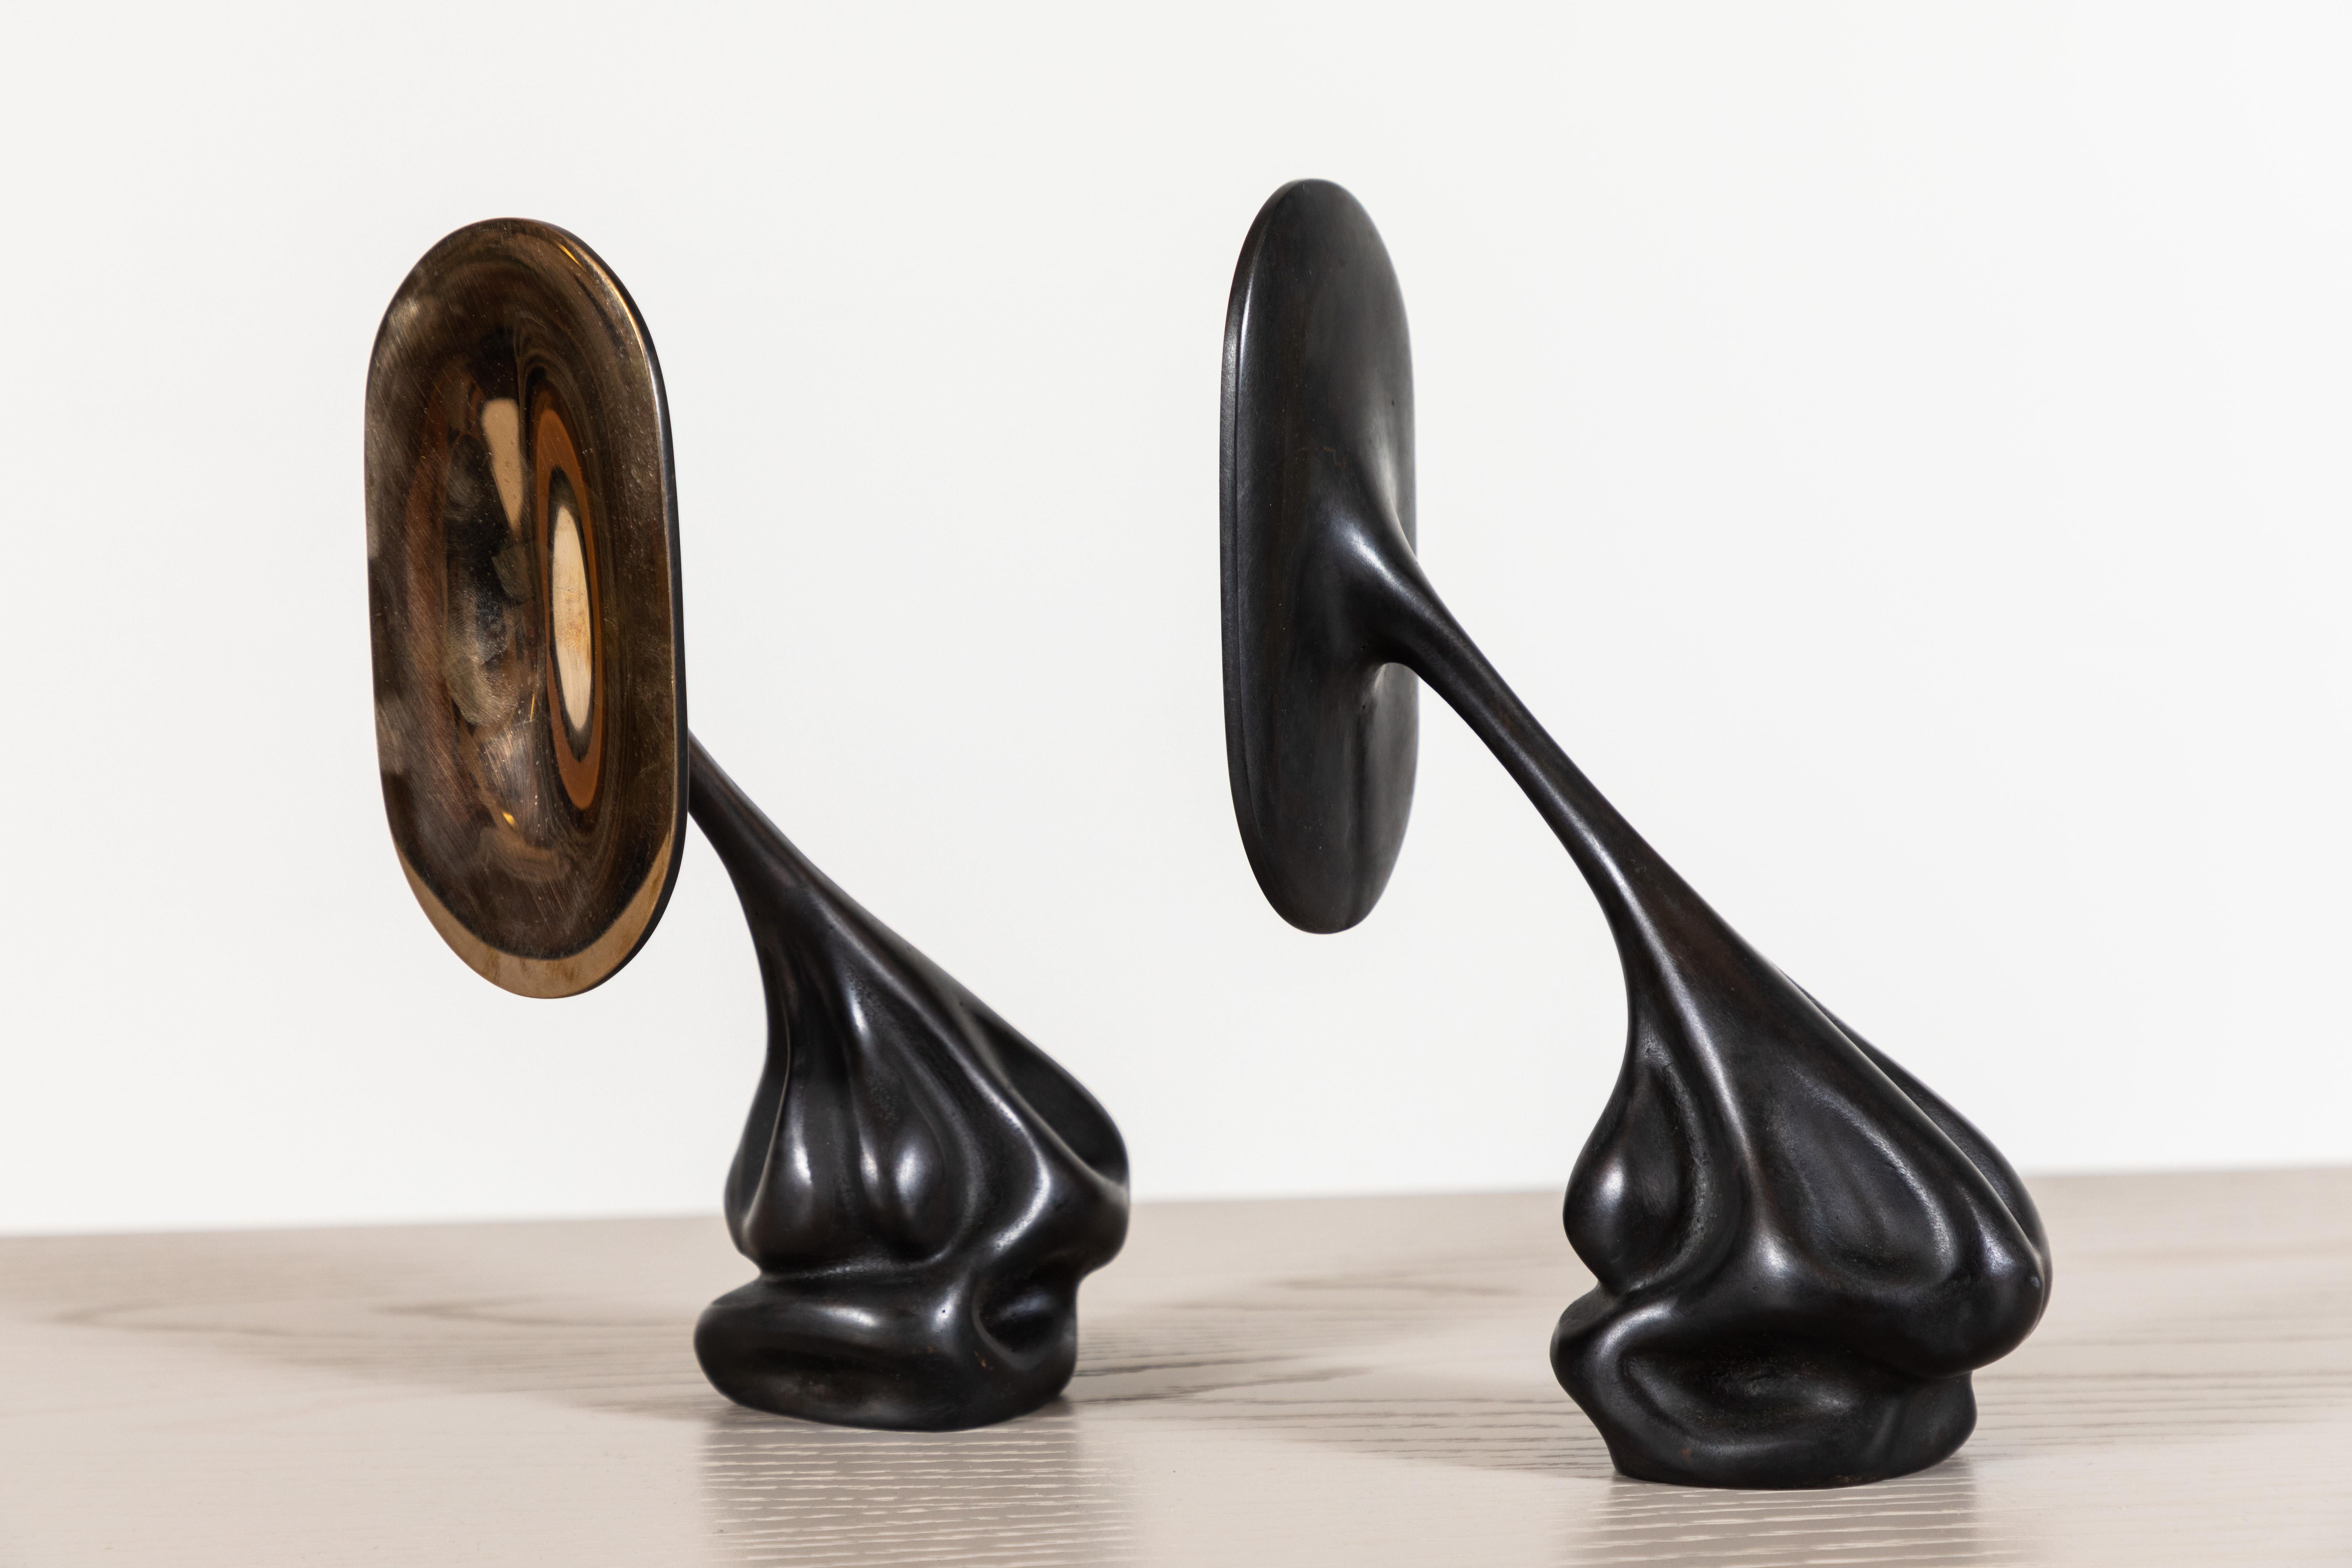 North American Pair of Cast Bronze Bookends by Artist Vincent Pocsik